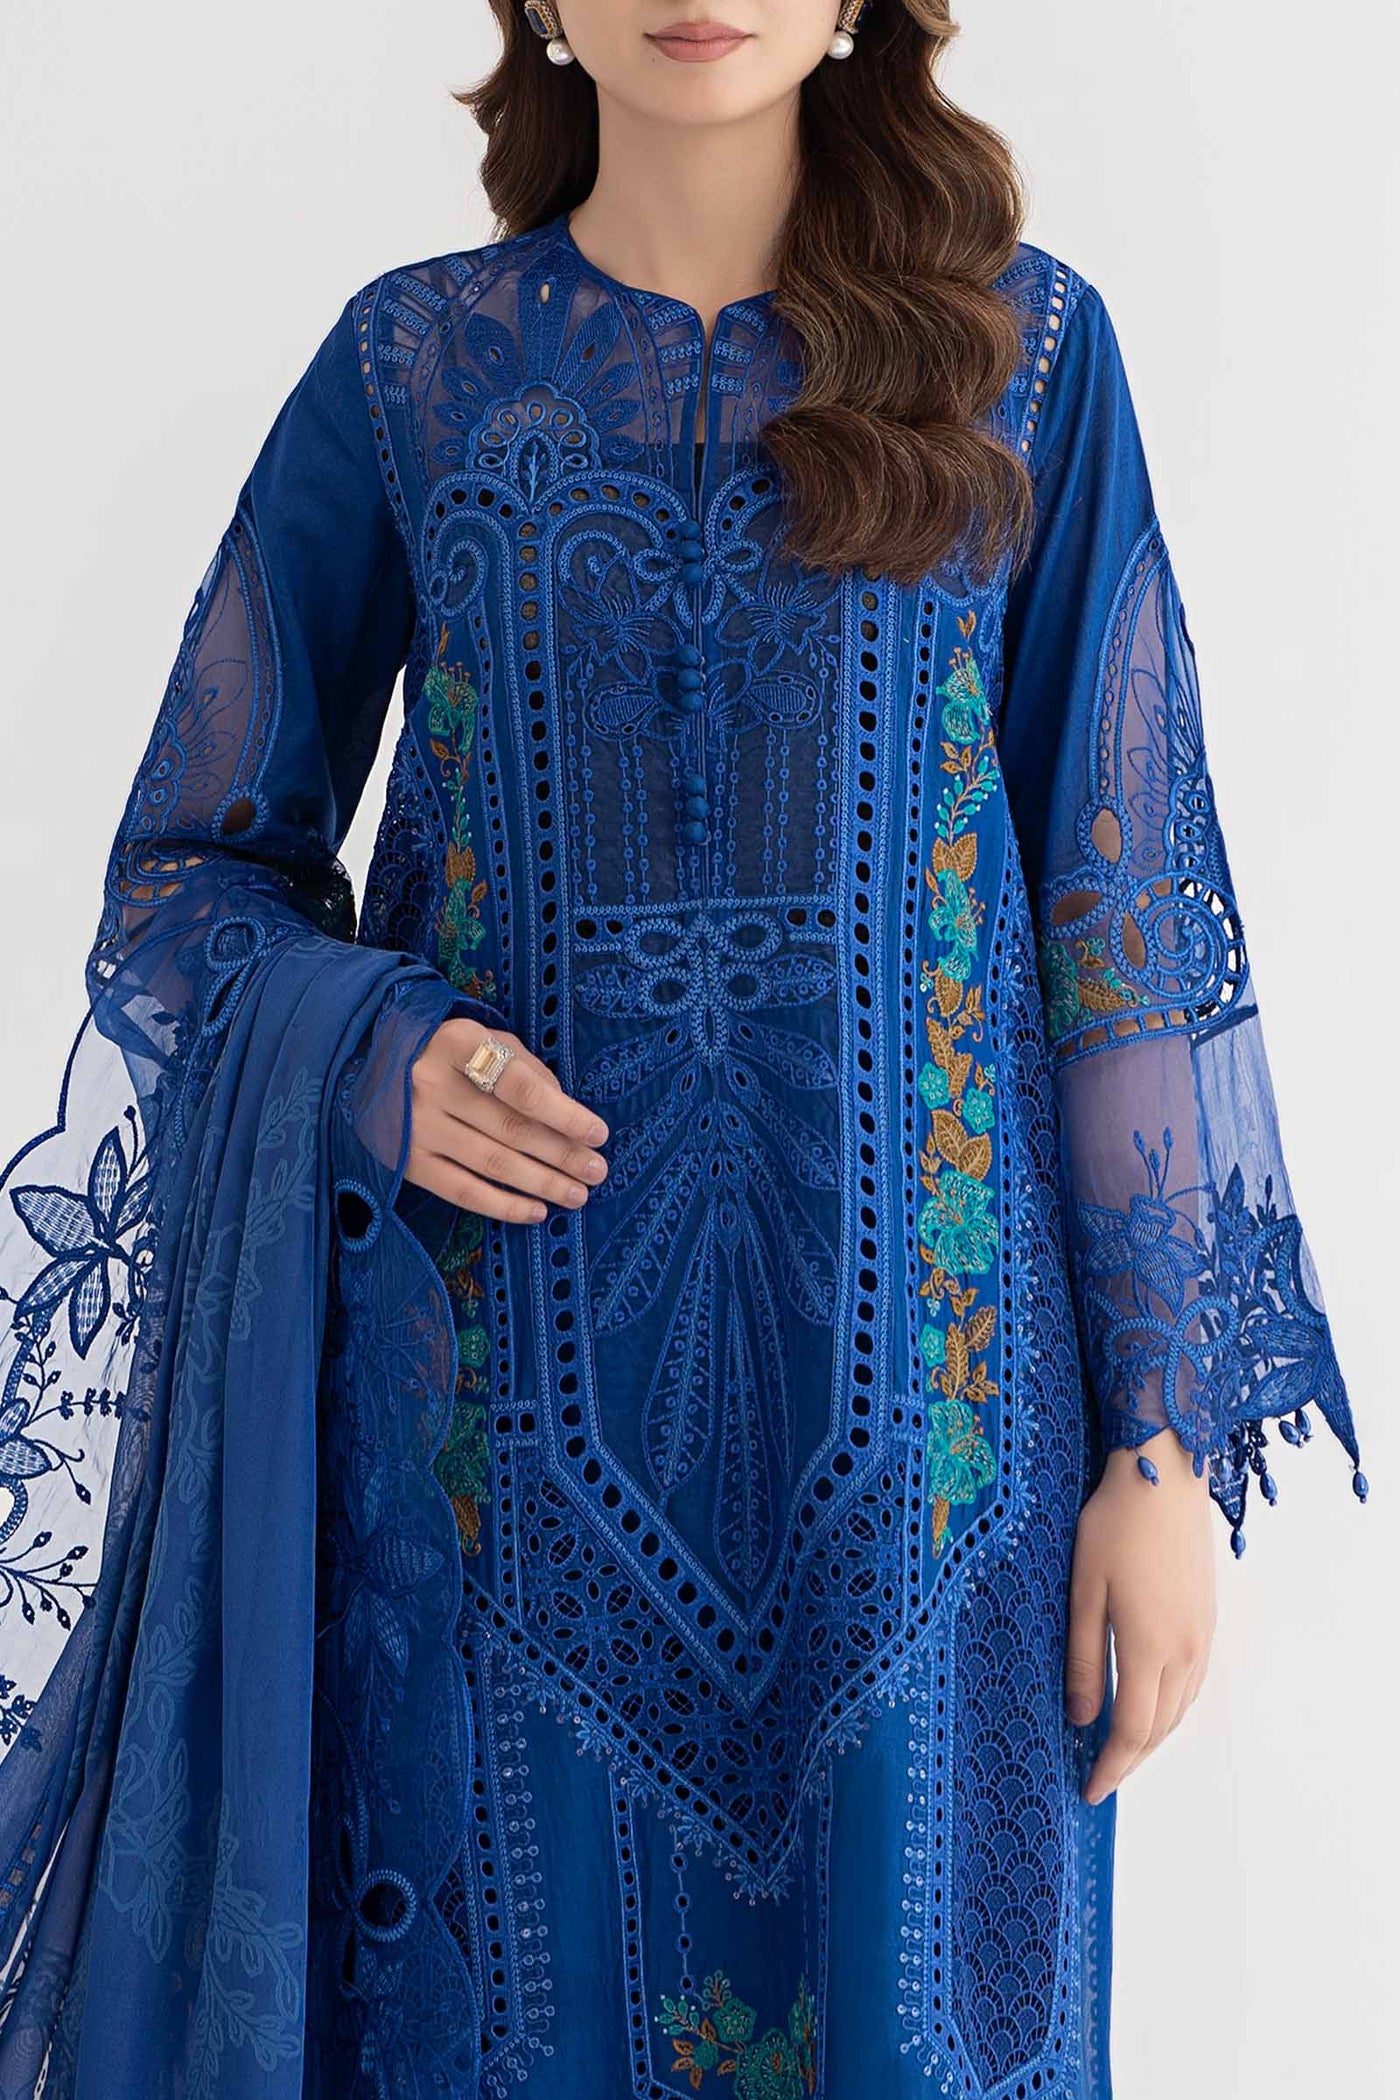 3 PIECE EMBROIDERED LAWN SUIT | DS-2404-B